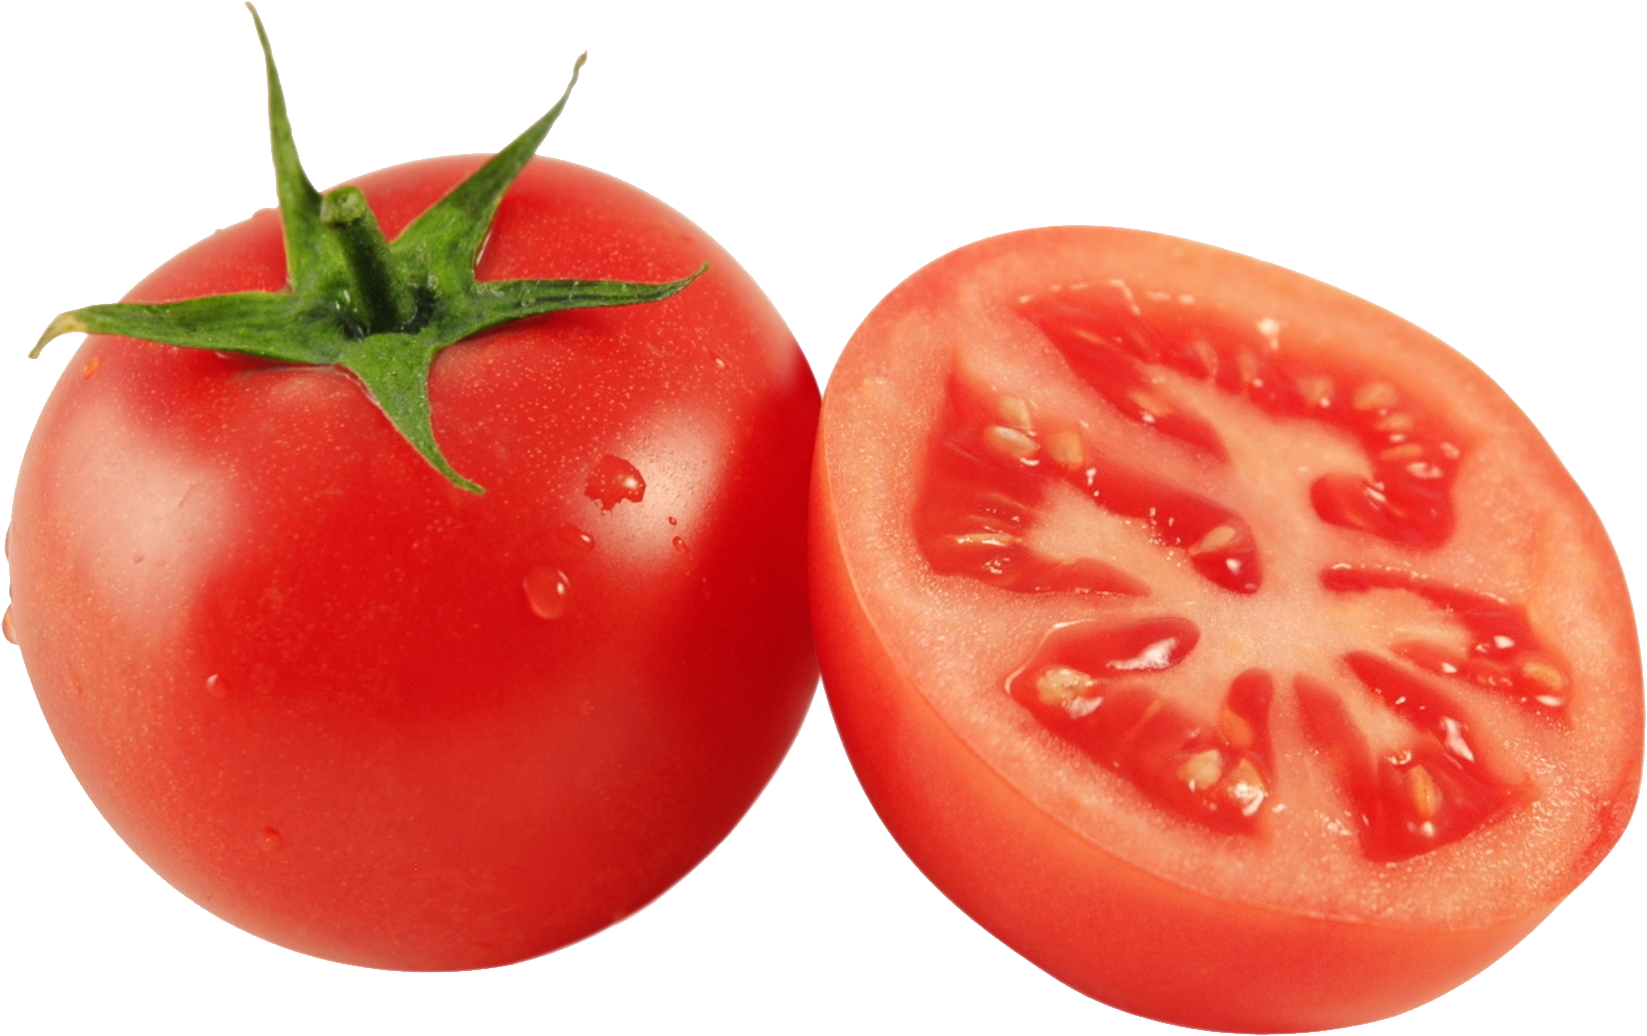 Tomato Png - Tomato, Transparent background PNG HD thumbnail